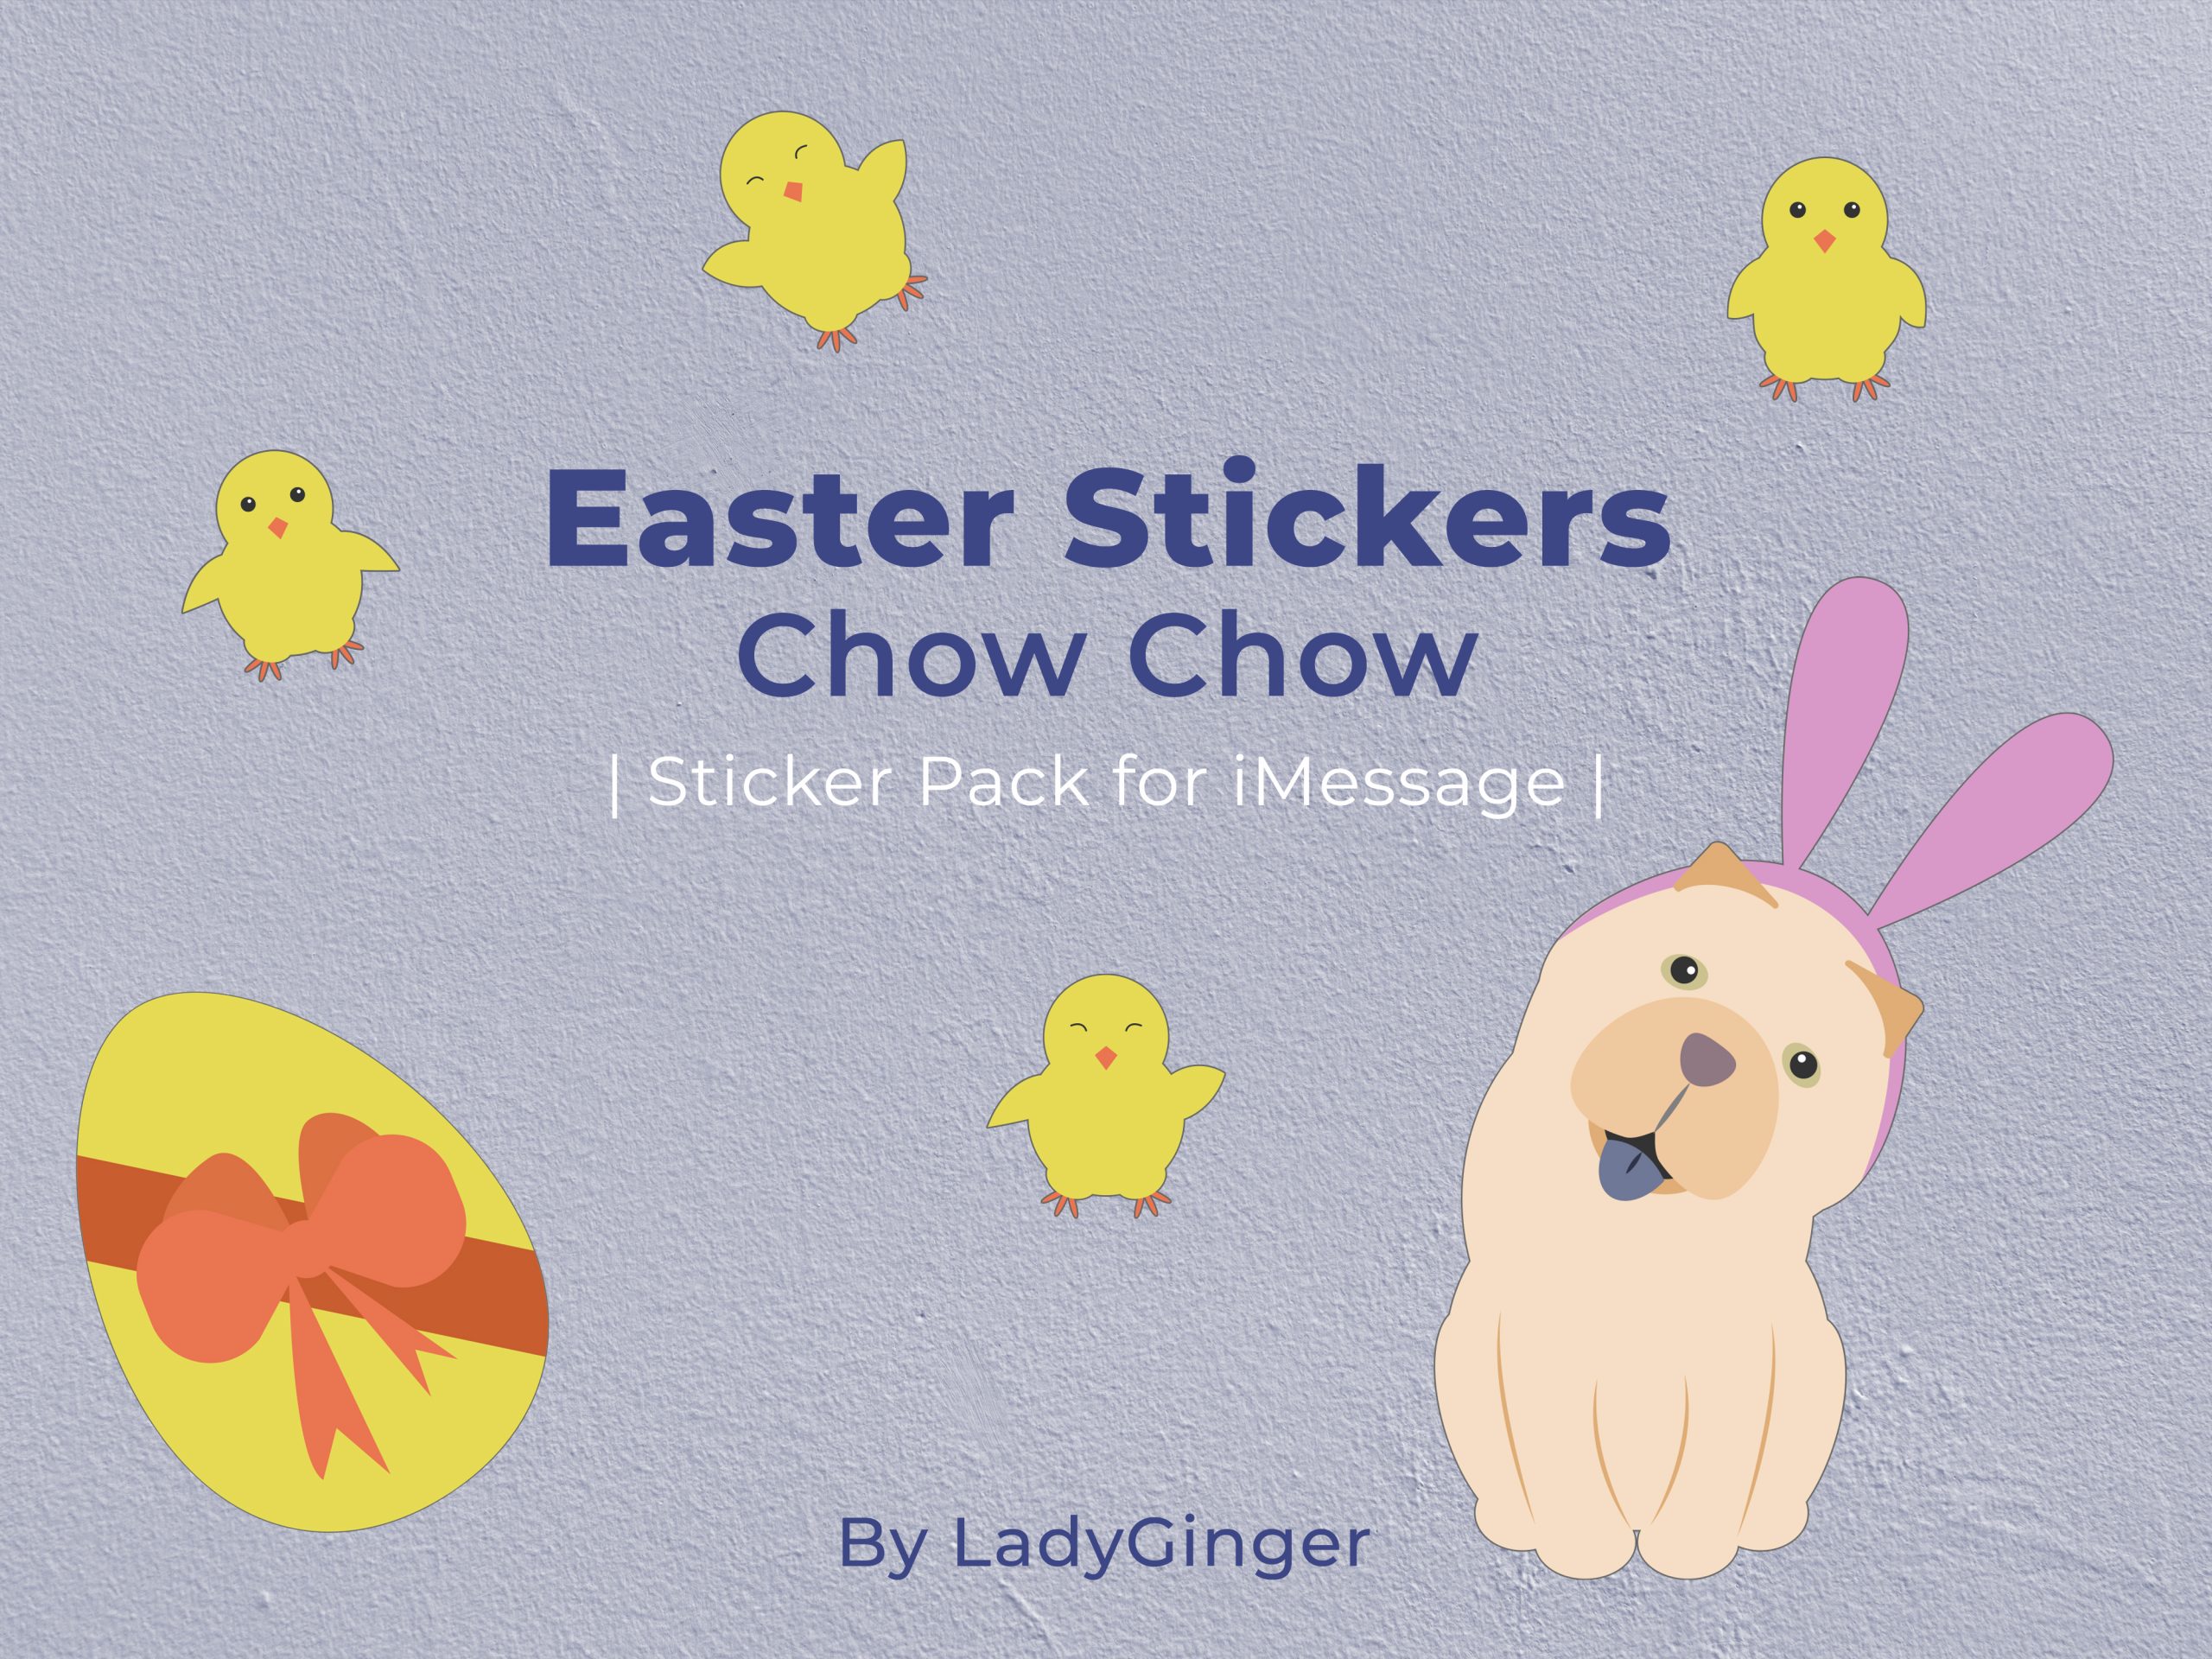 Easter Stickers Chow Chow